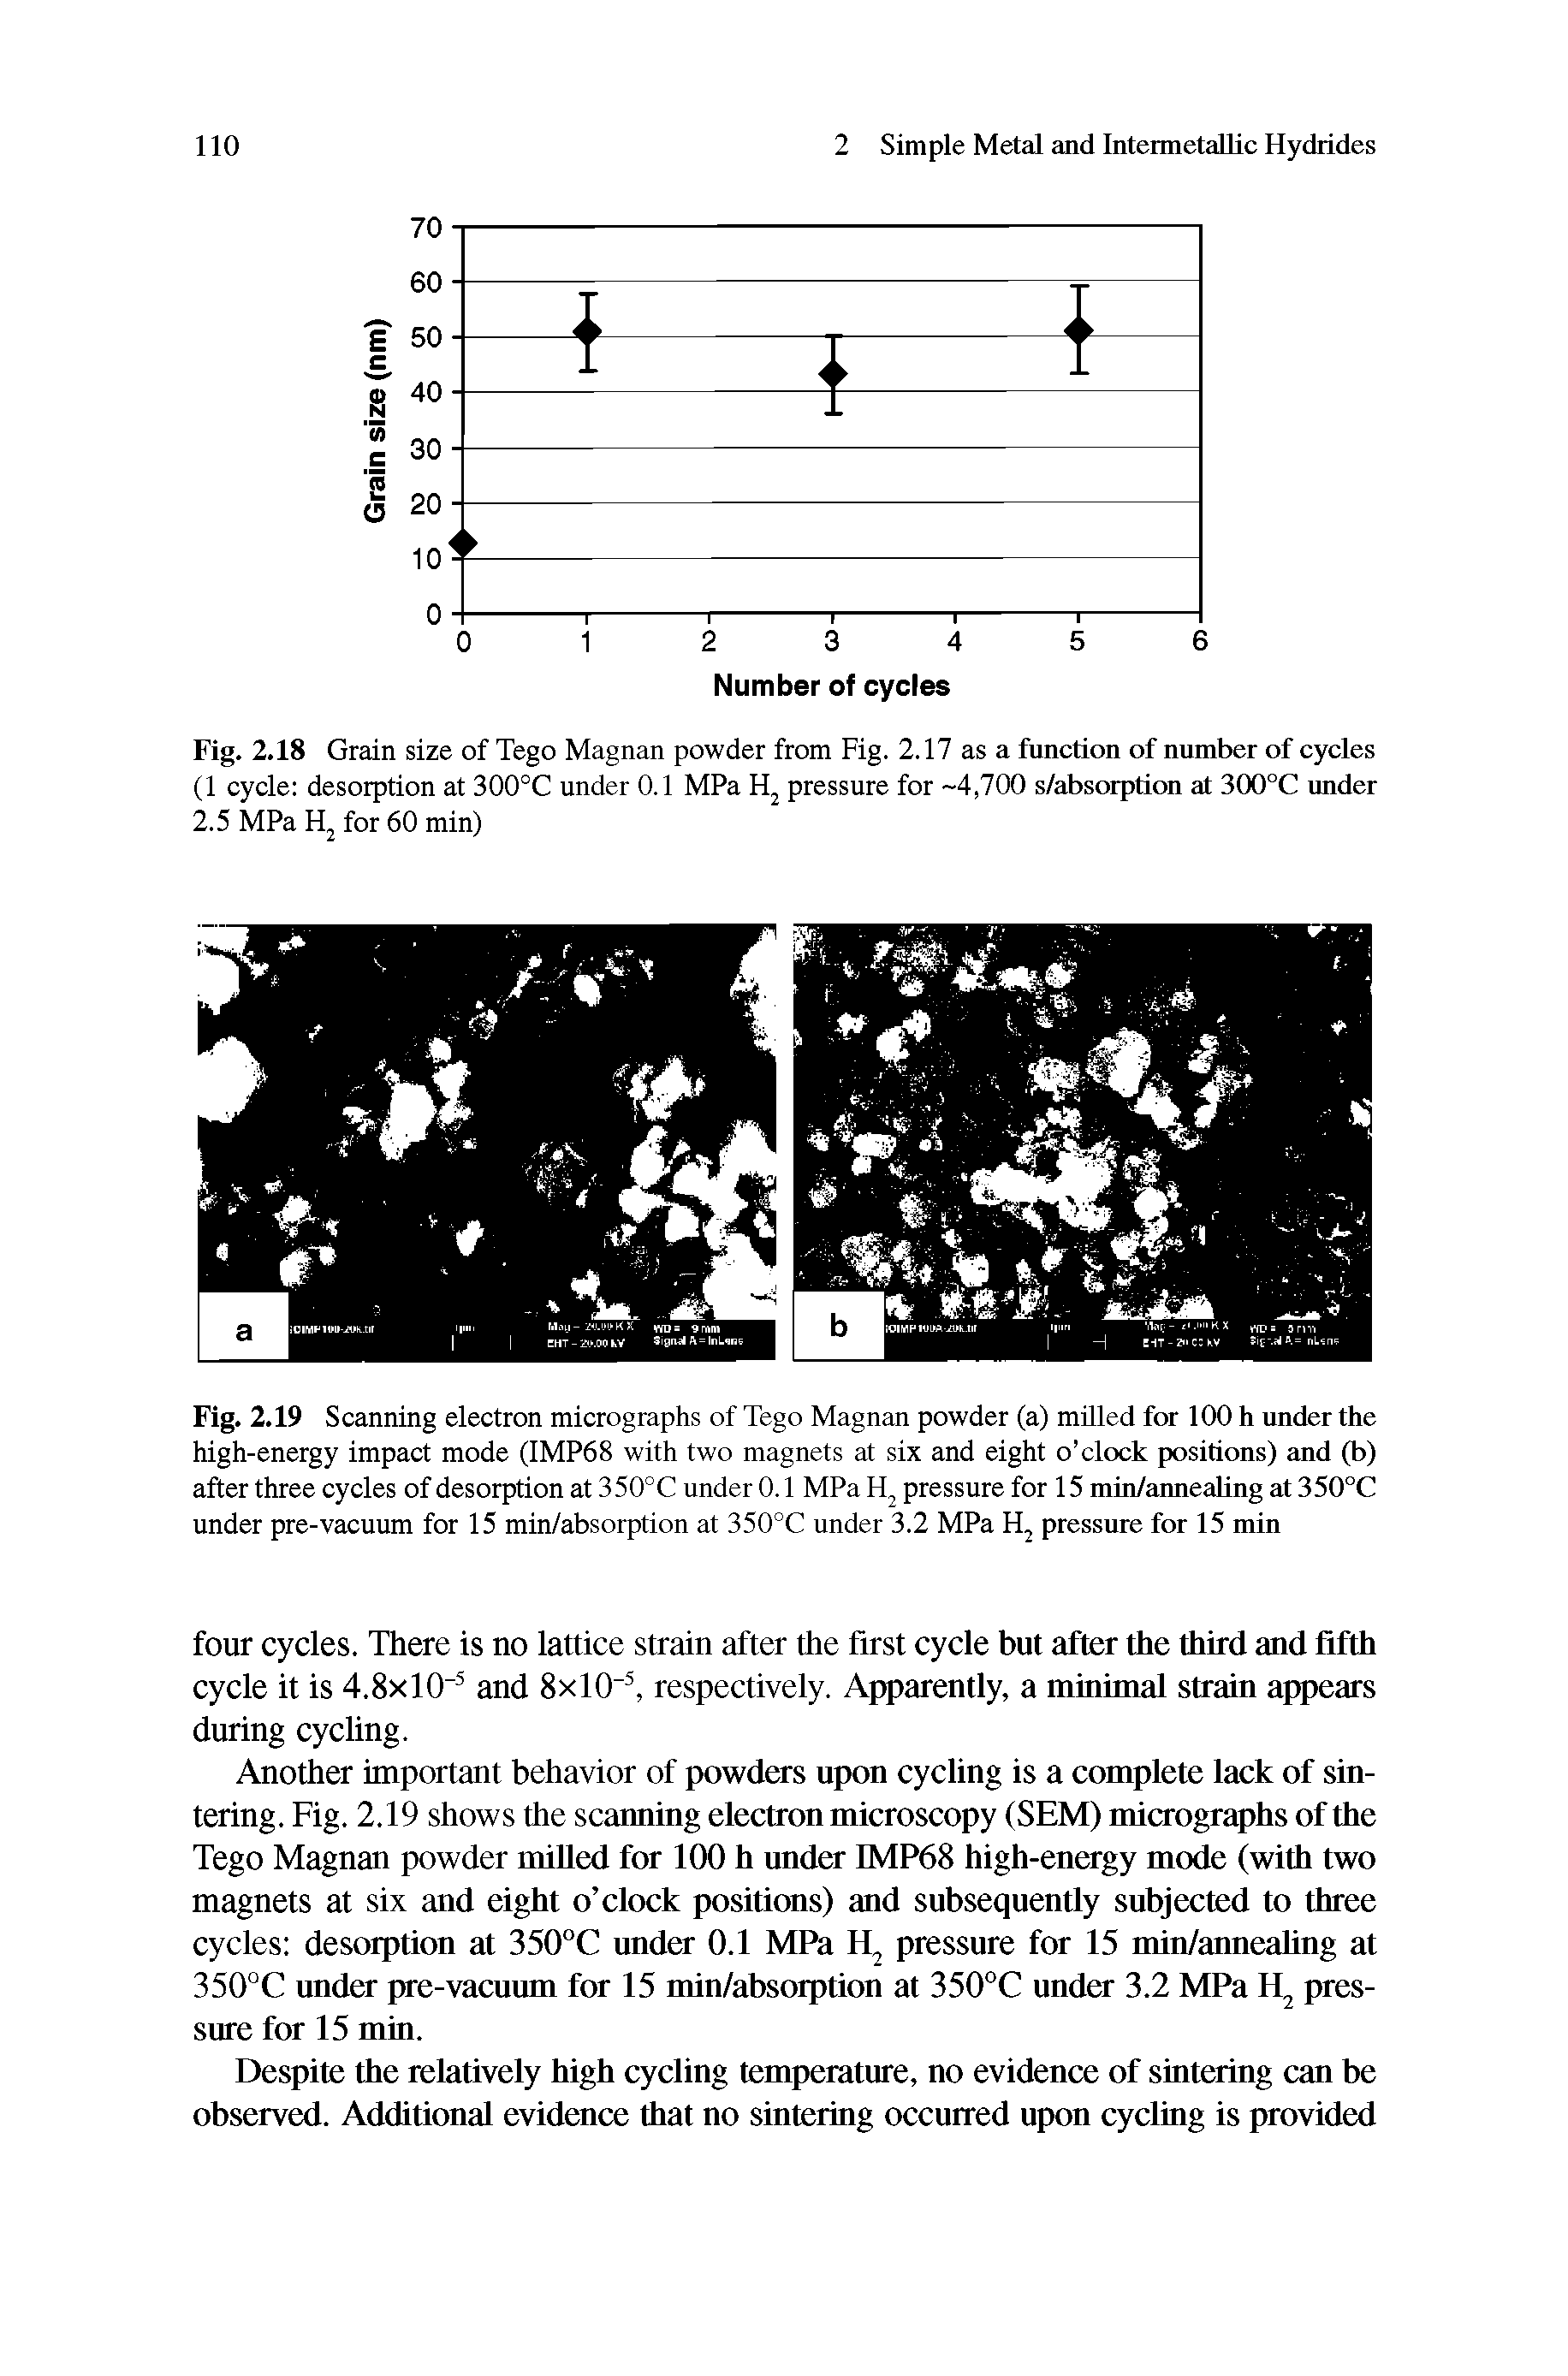 Fig. 2.19 Scanning electron micrographs of Tego Magnan powder (a) milled for 100 h under the high-energy impact mode (IMP68 with two magnets at six and eight o clock positions) and (b) after three cycles of desorption at 350°C under 0.1 MPaH pressure for 15 min/annealing at 350°C under pre-vacuum for 15 min/absorption at 350°C under 3.2 MPa pressure for 15 min...